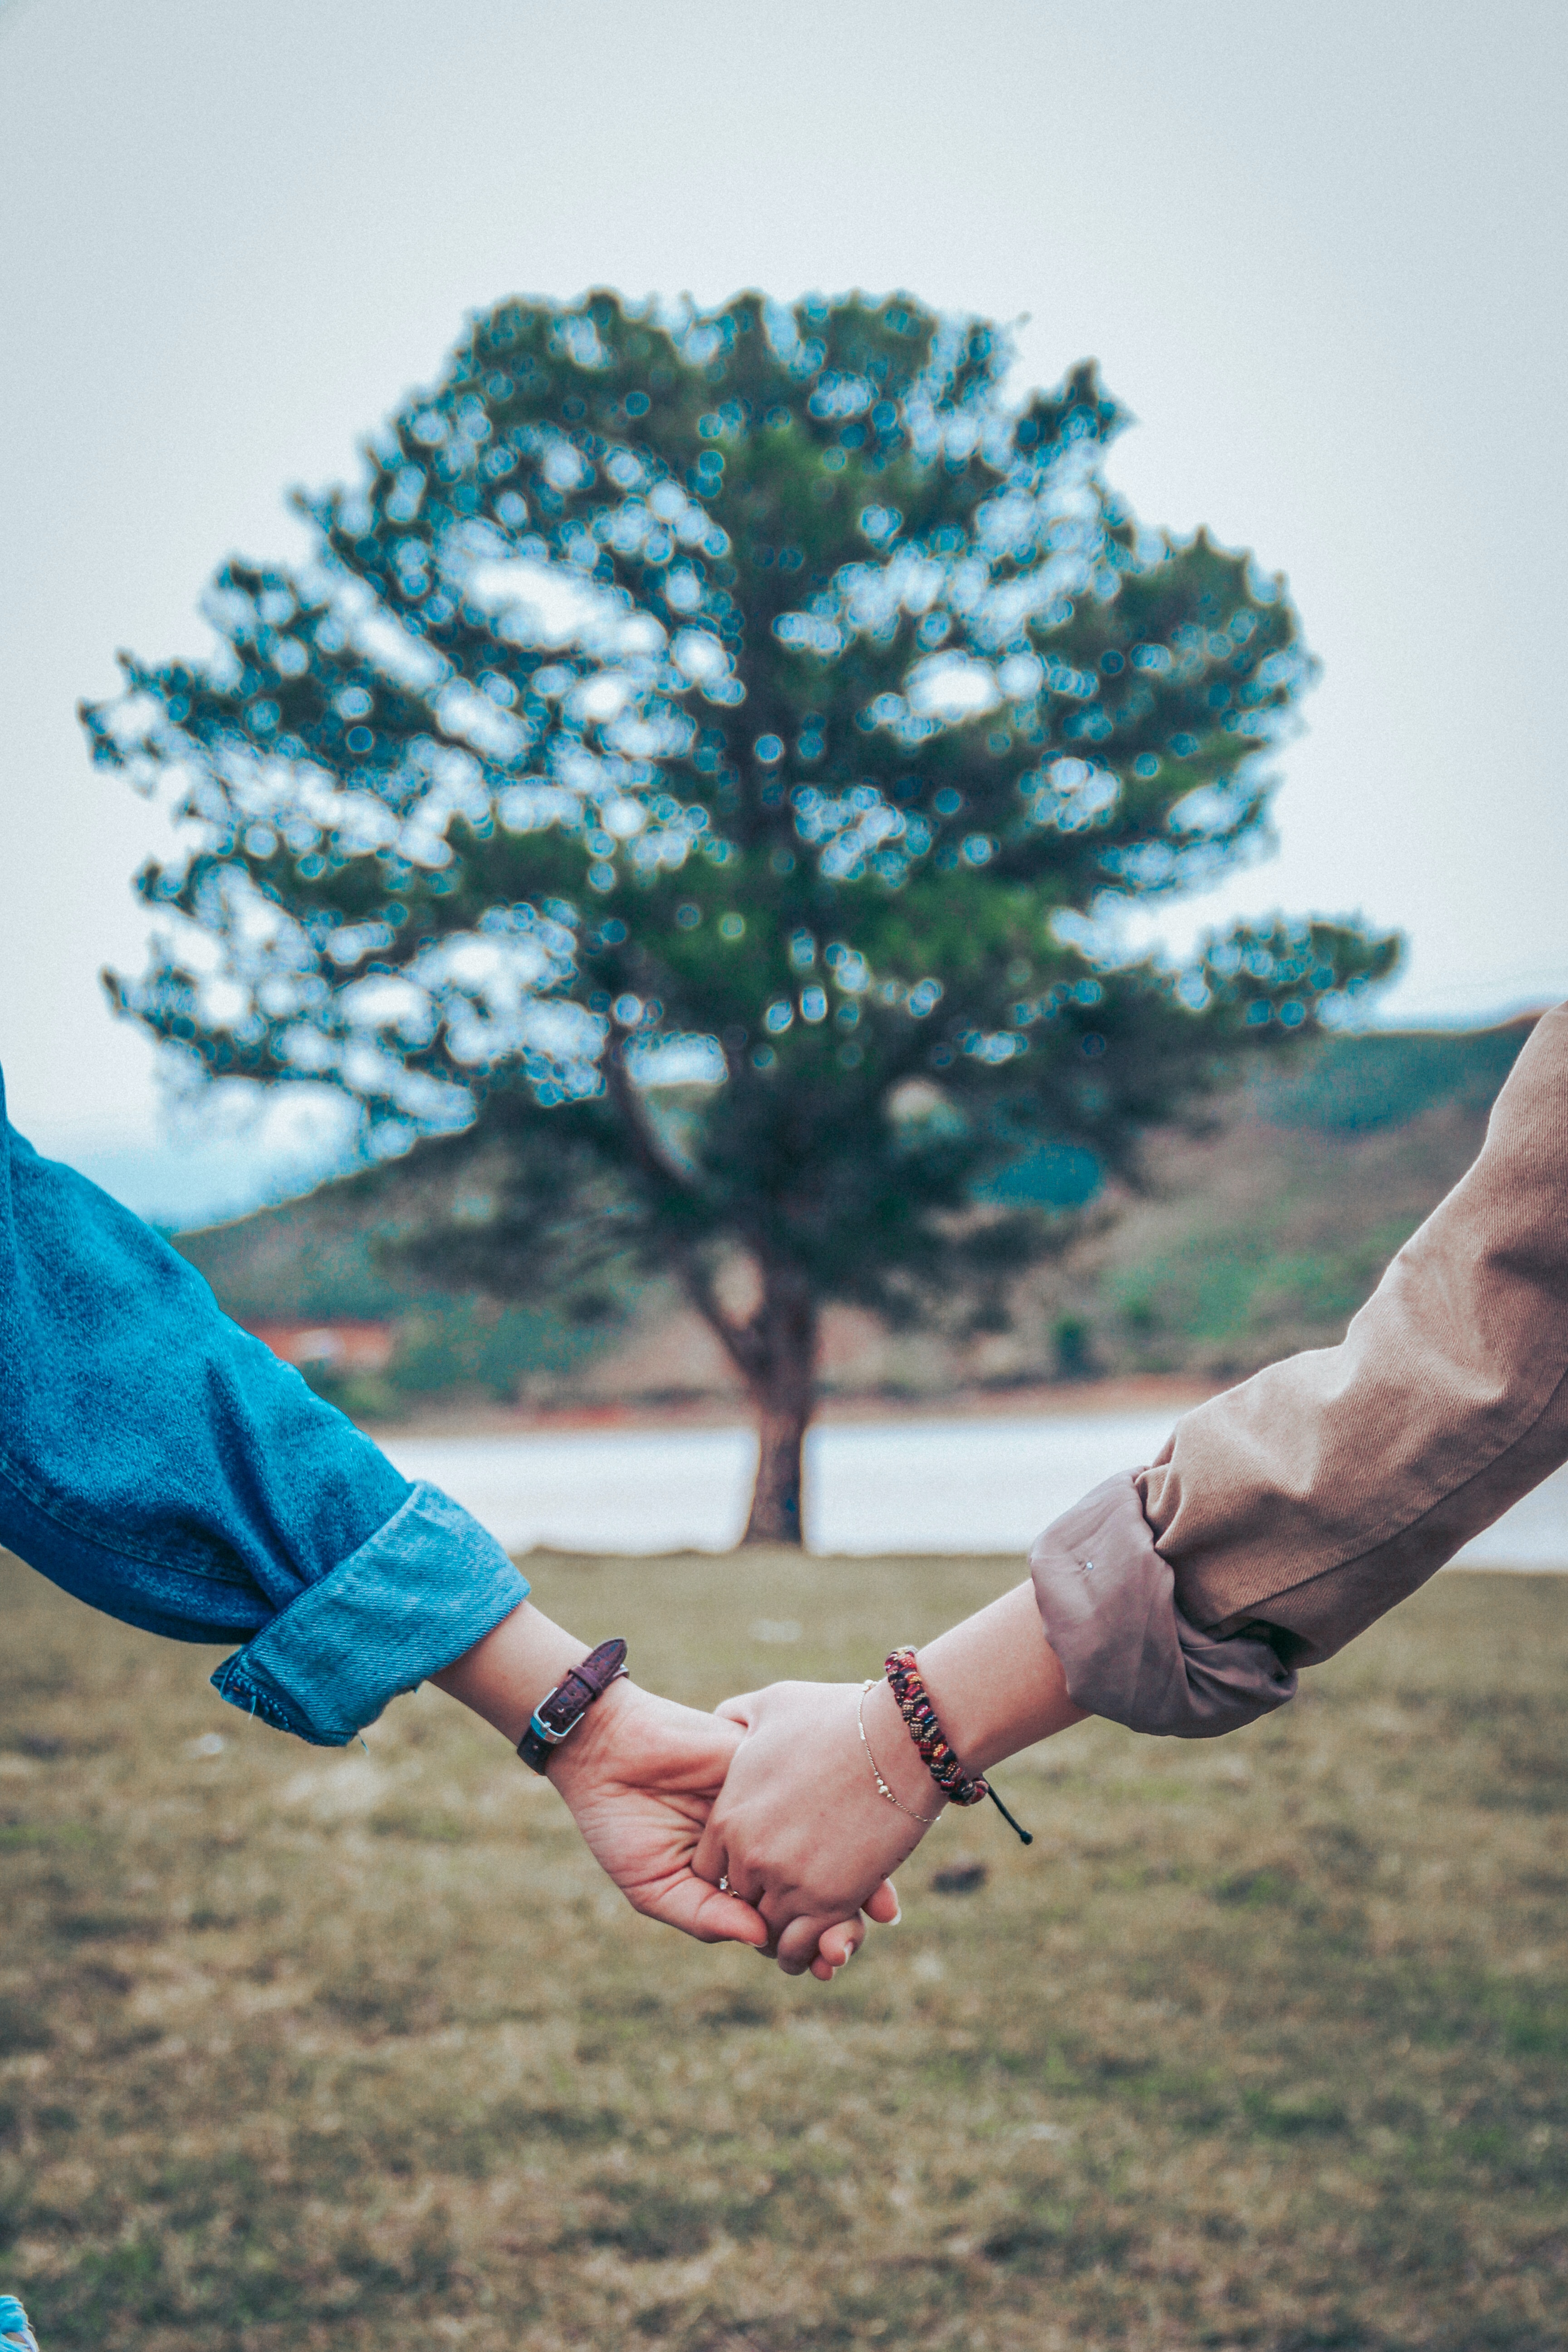 A photo of two people holding hands | Source: Unsplash